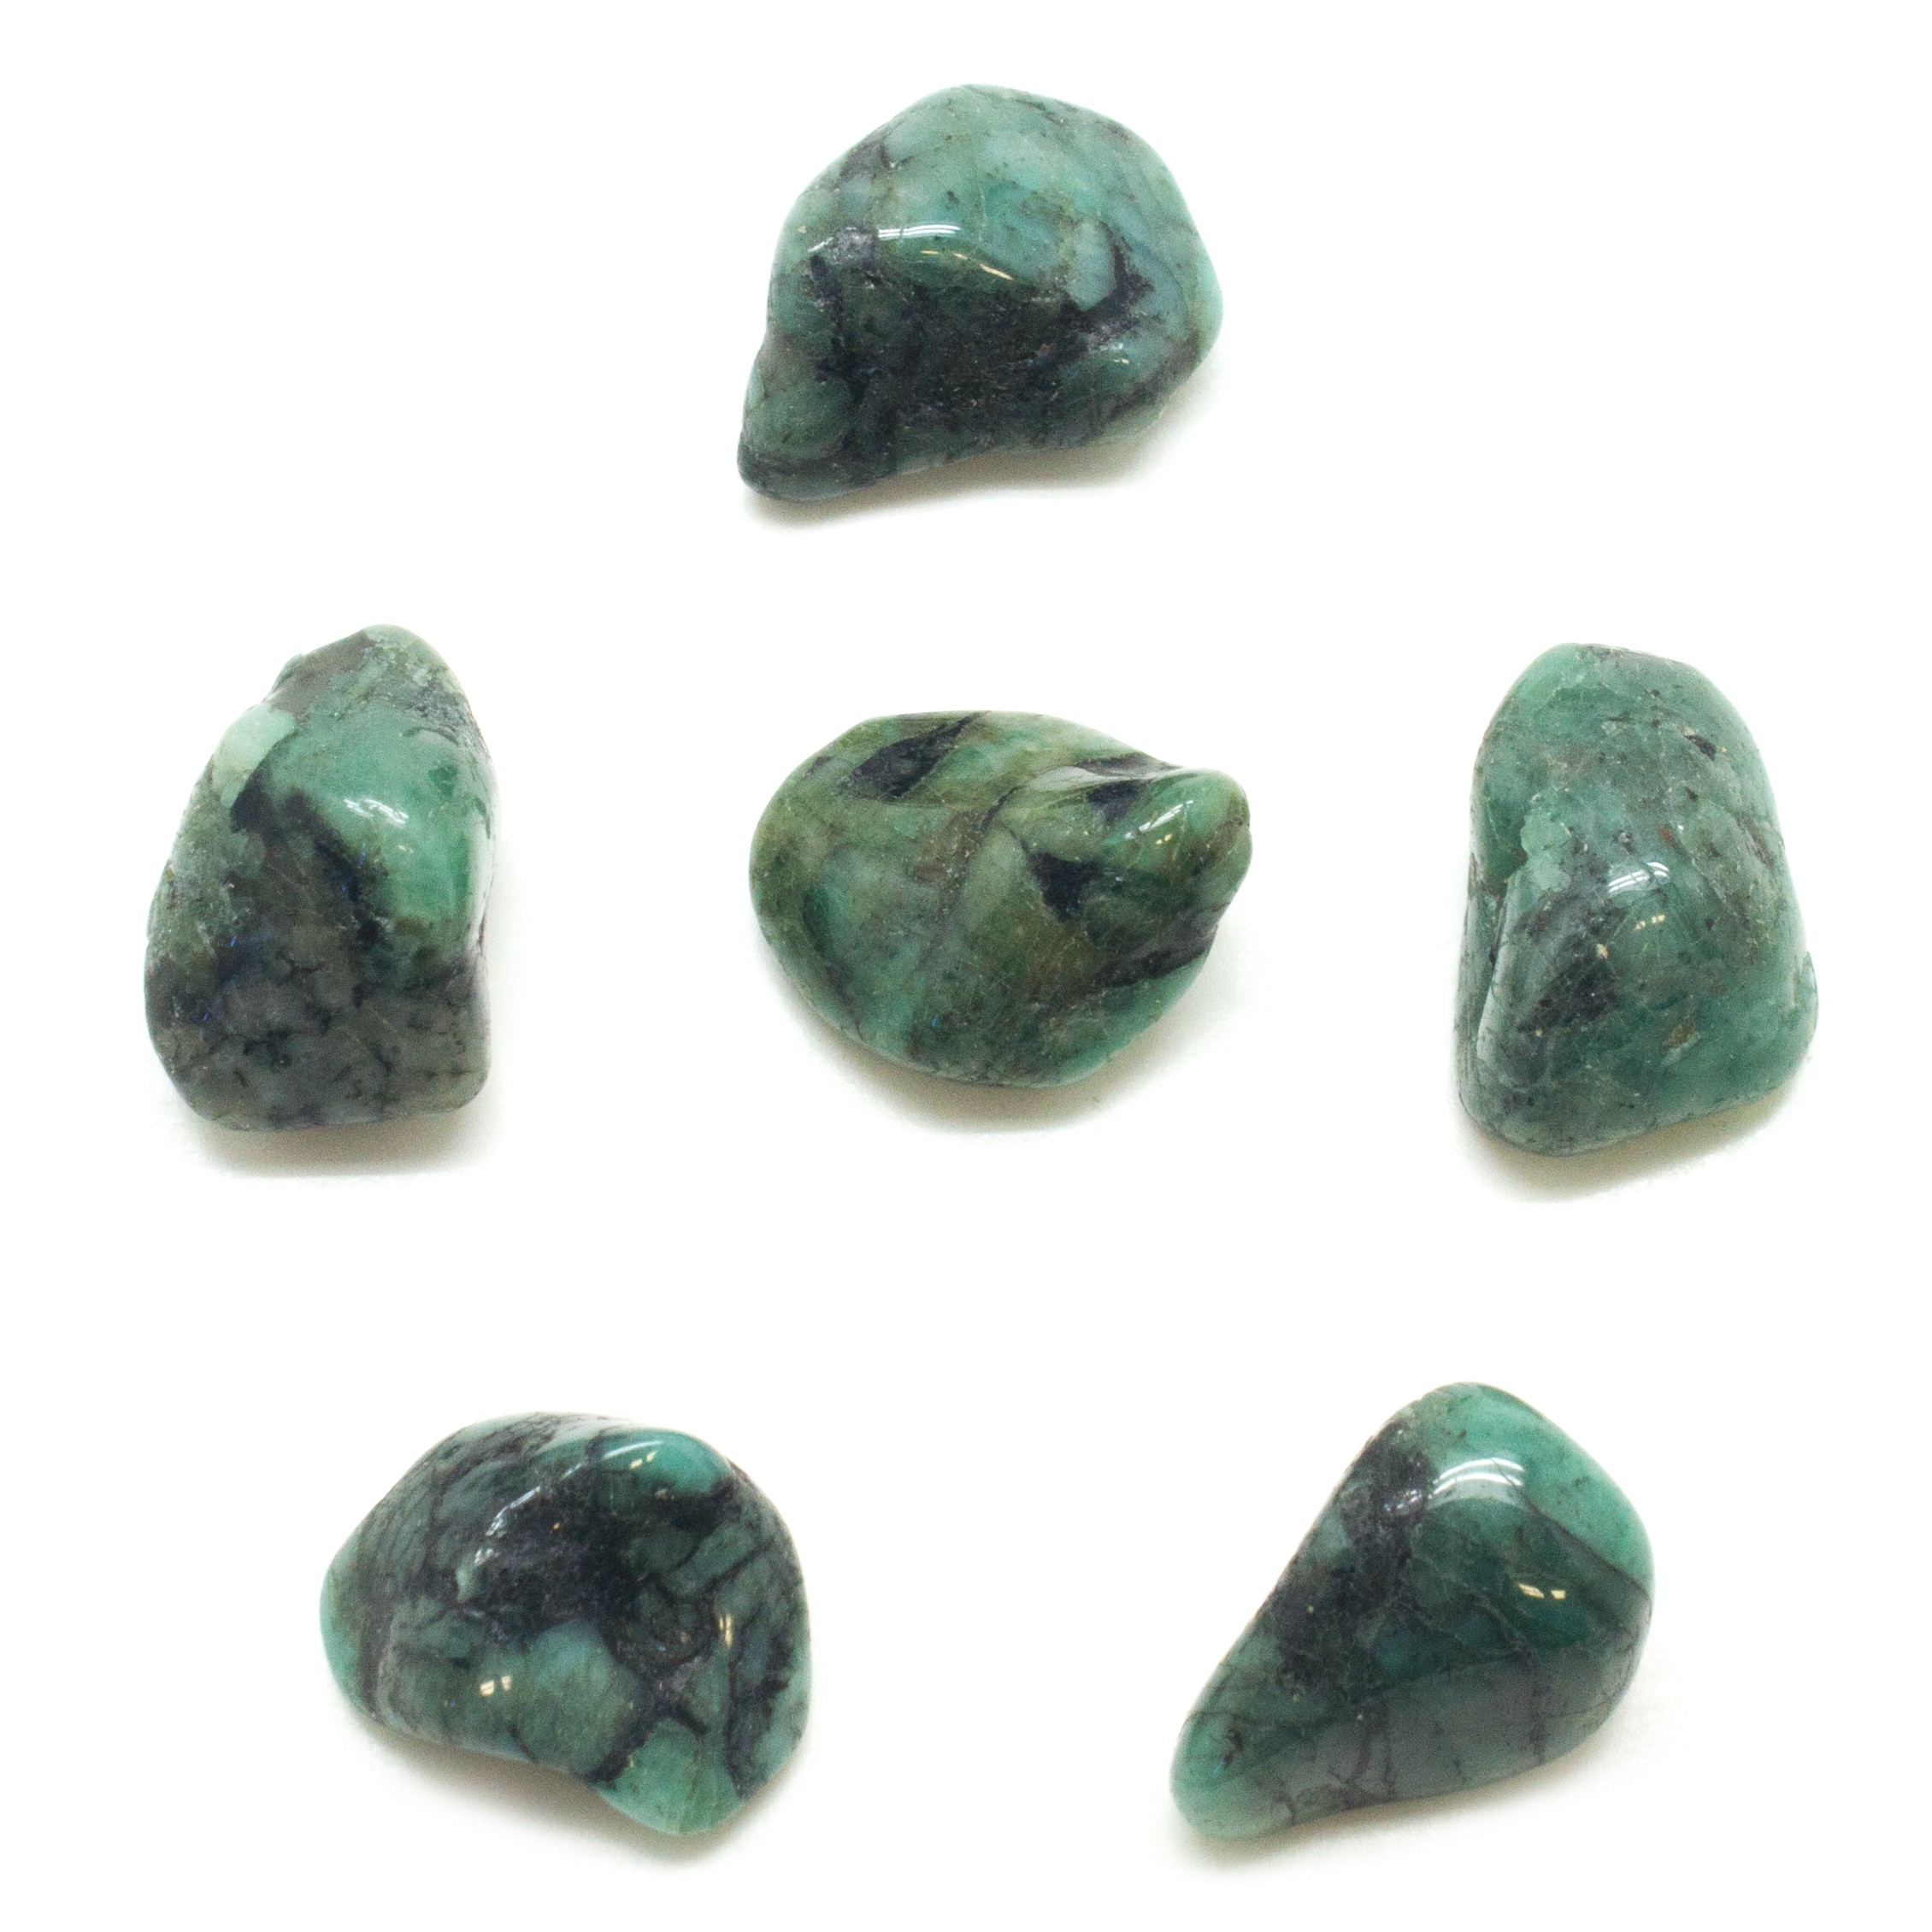 Emerald Tumbled Stones (Med.) | Crystal Vaults